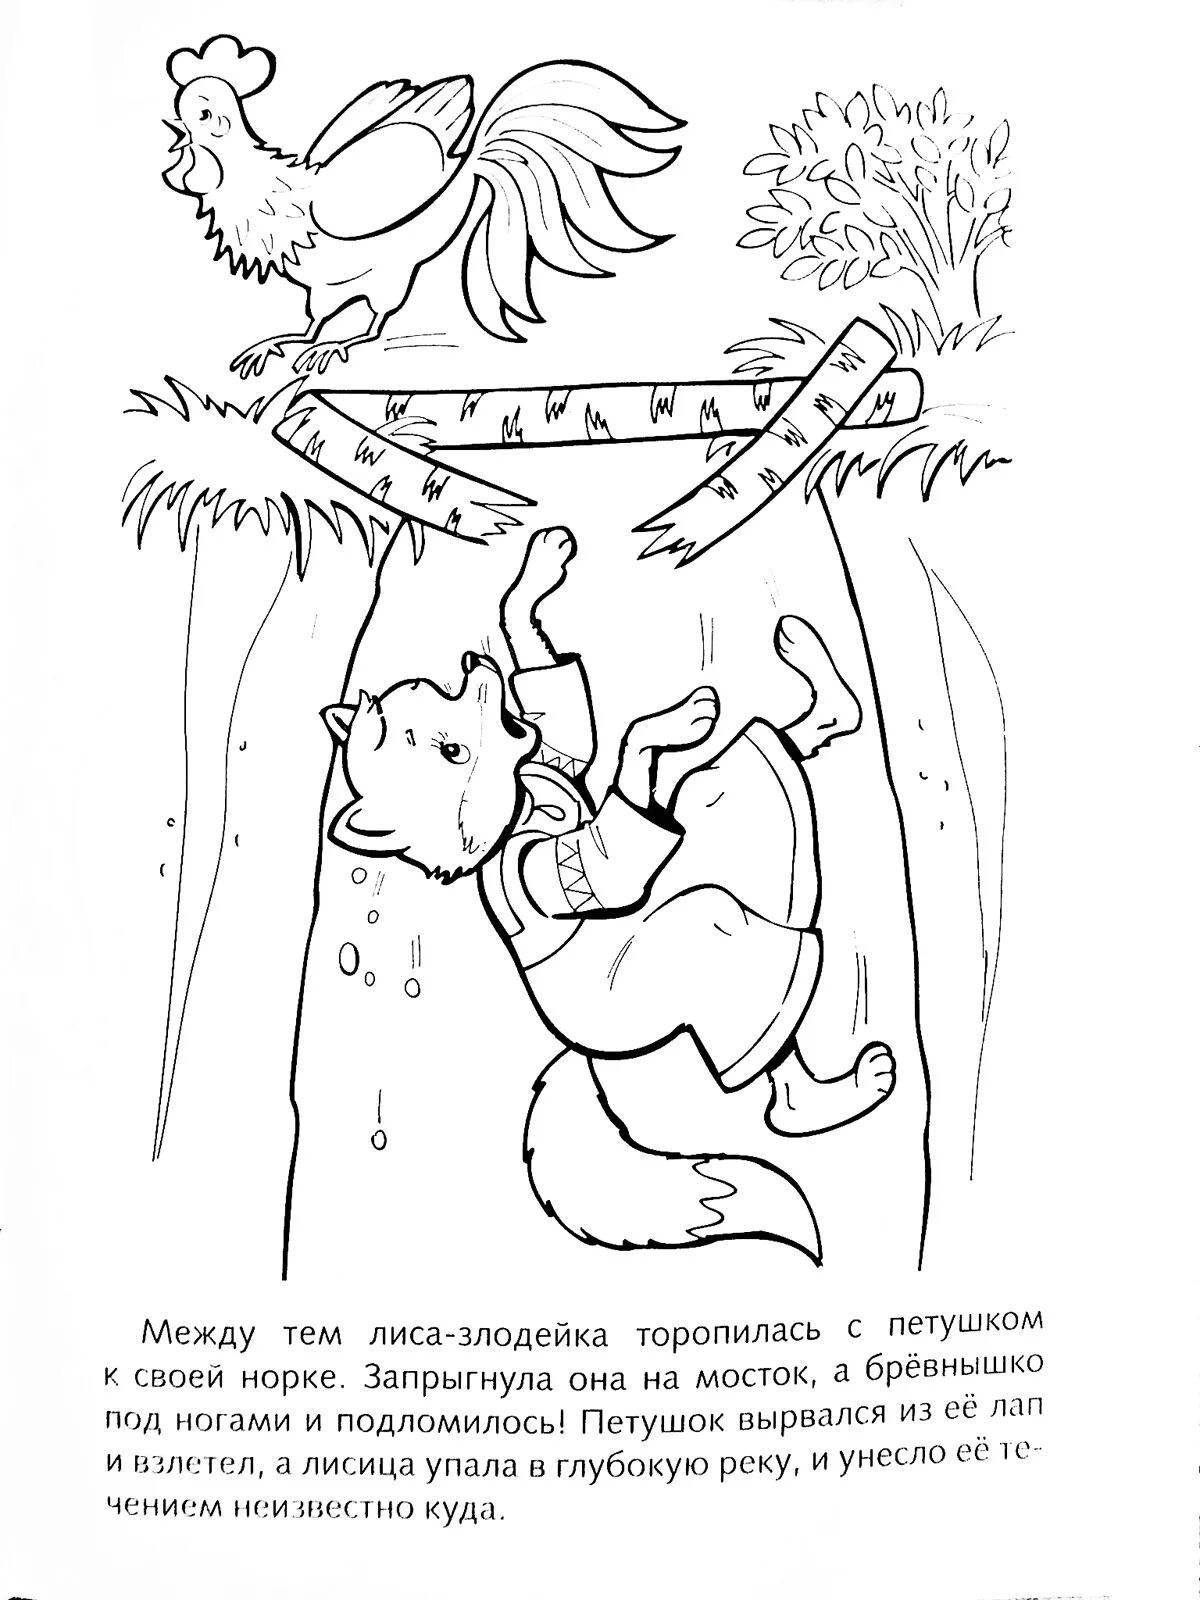 Cute fox and rooster coloring Russian folk tale